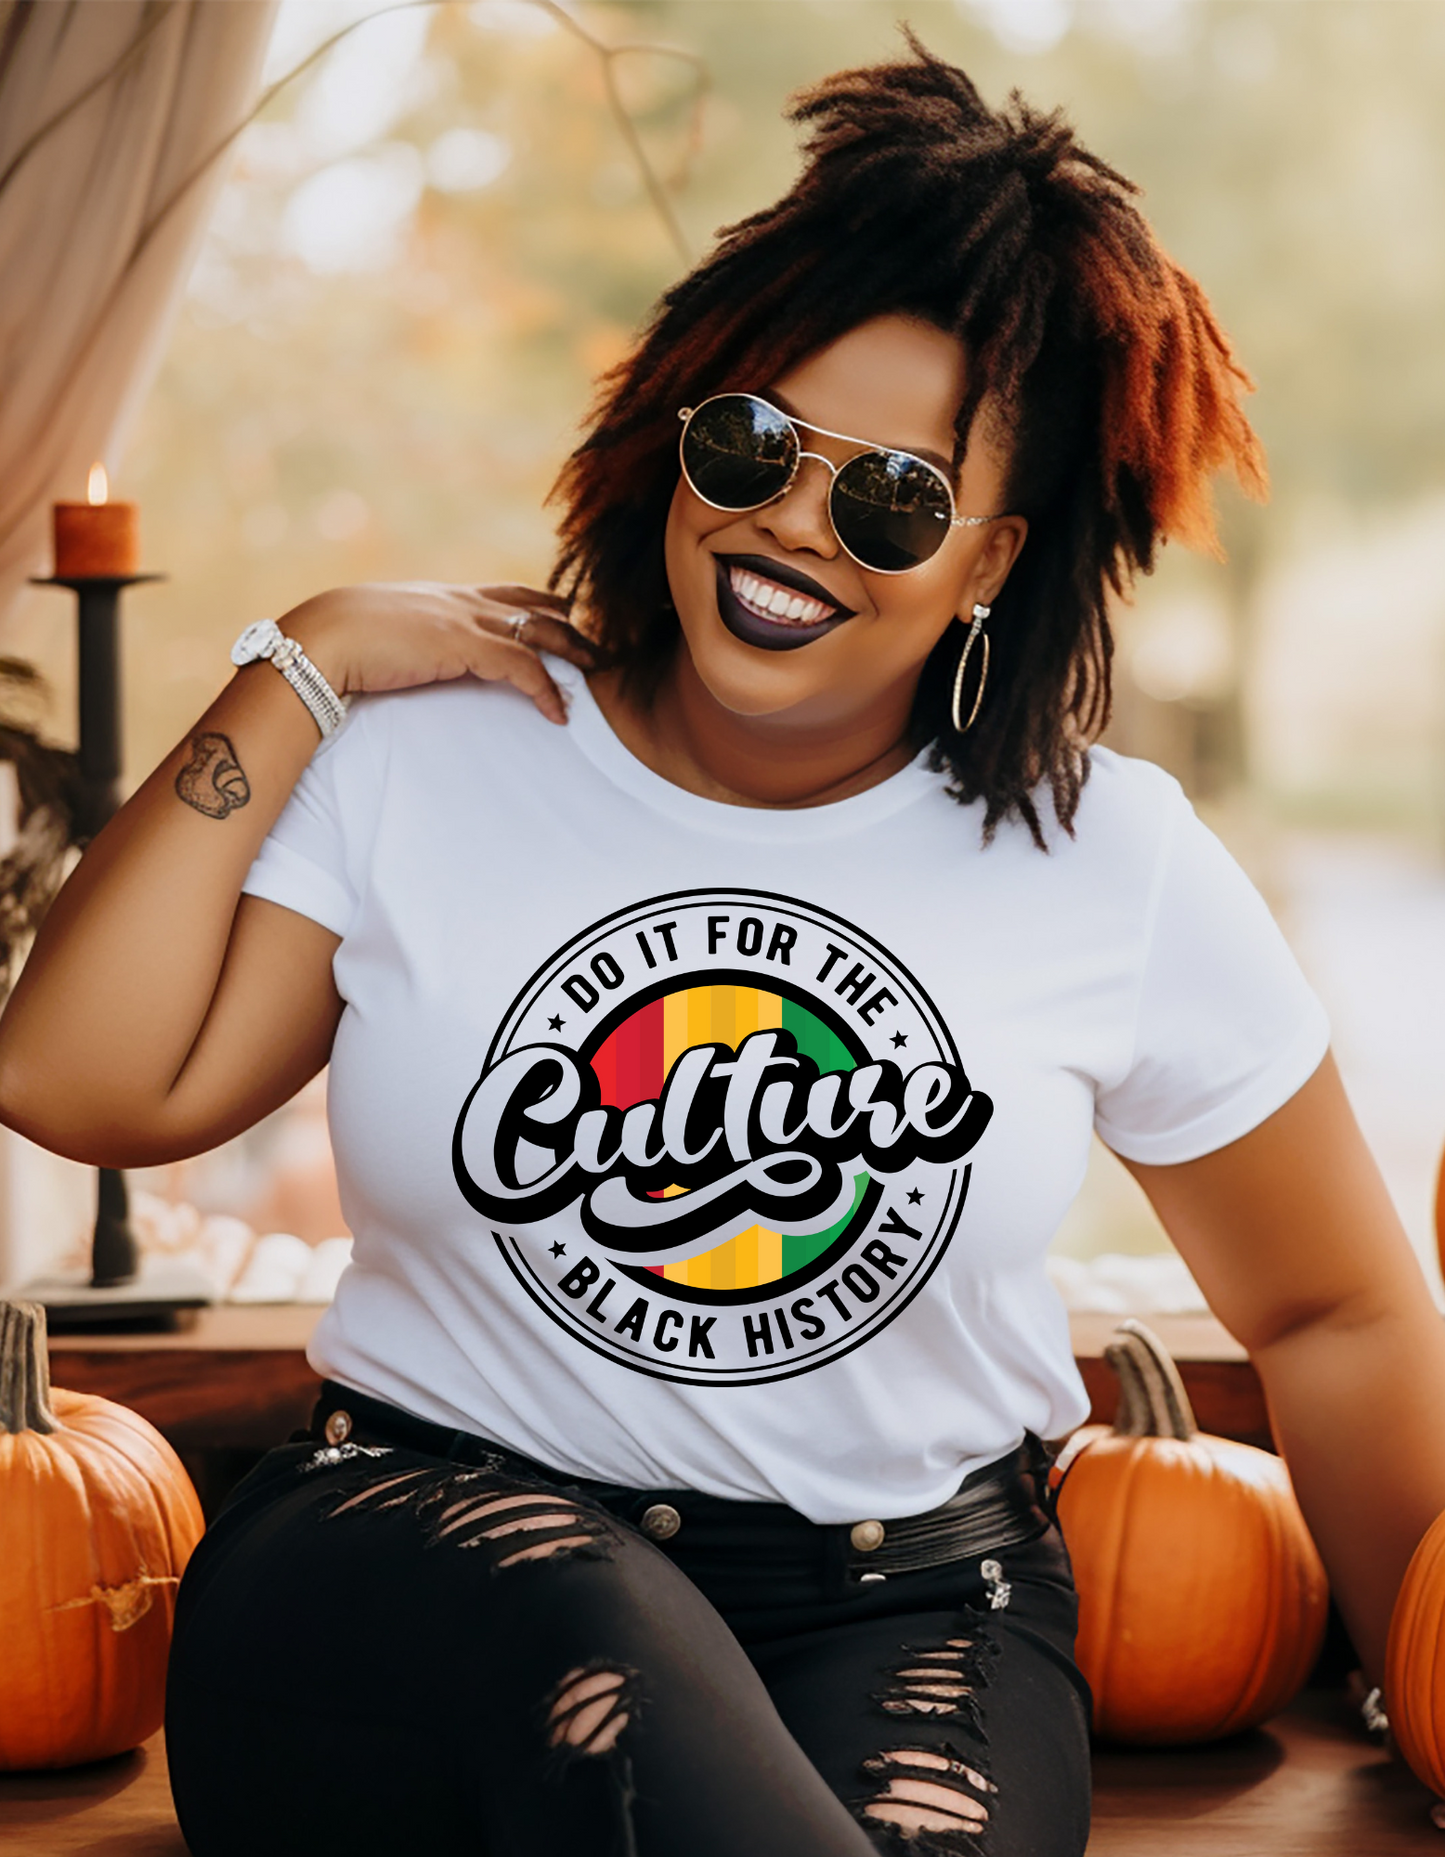 Do It For The Culture T-shirt, Black History Shirts, Unisex Juneteenth Graphic Shirt